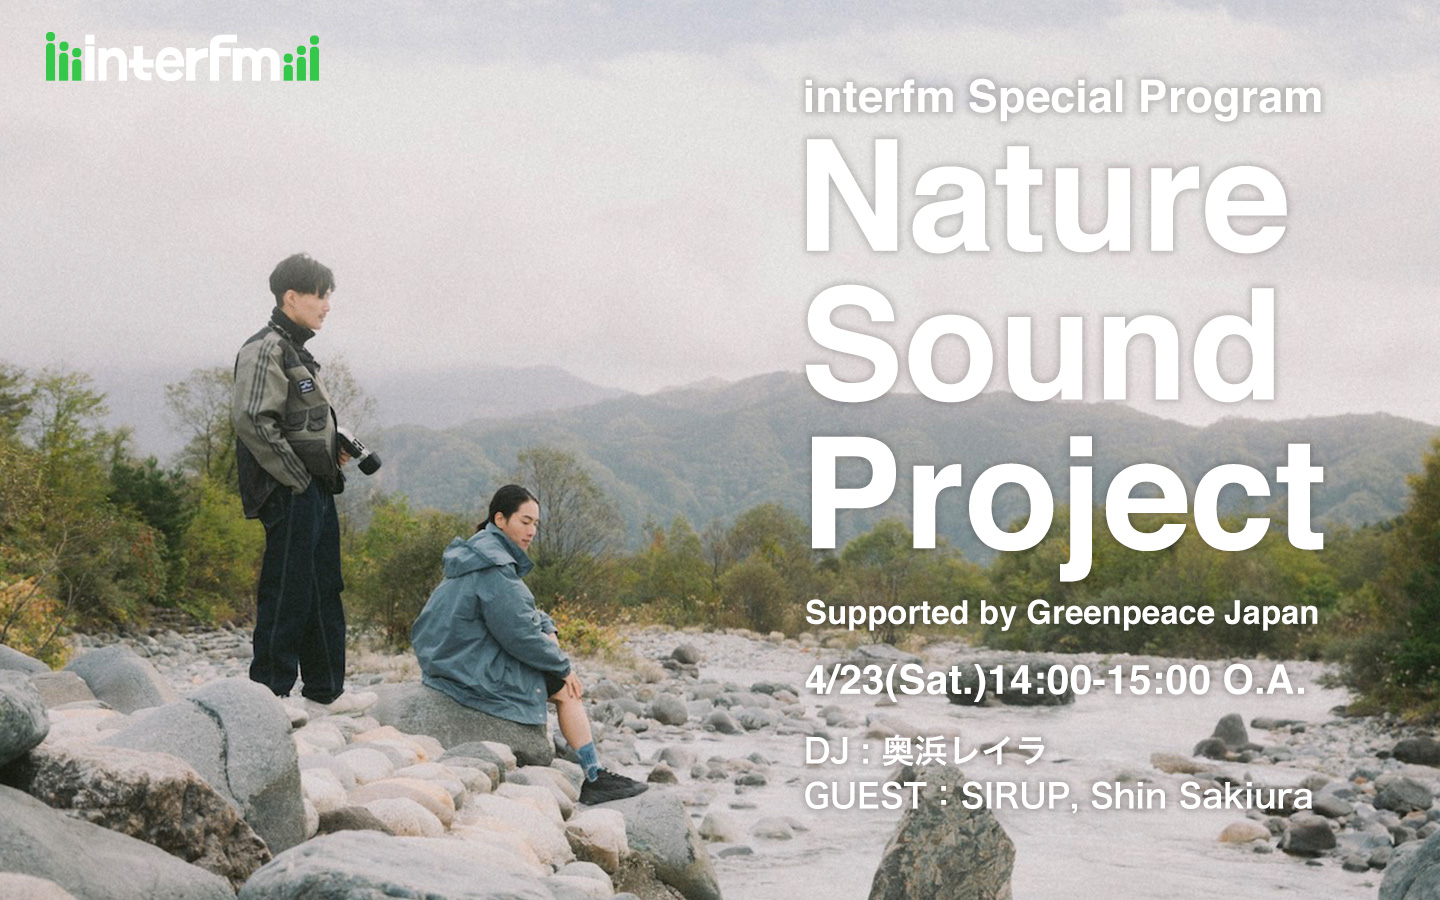 interfm Special Program Nature Sound Project Supported by Greenpeace Japan